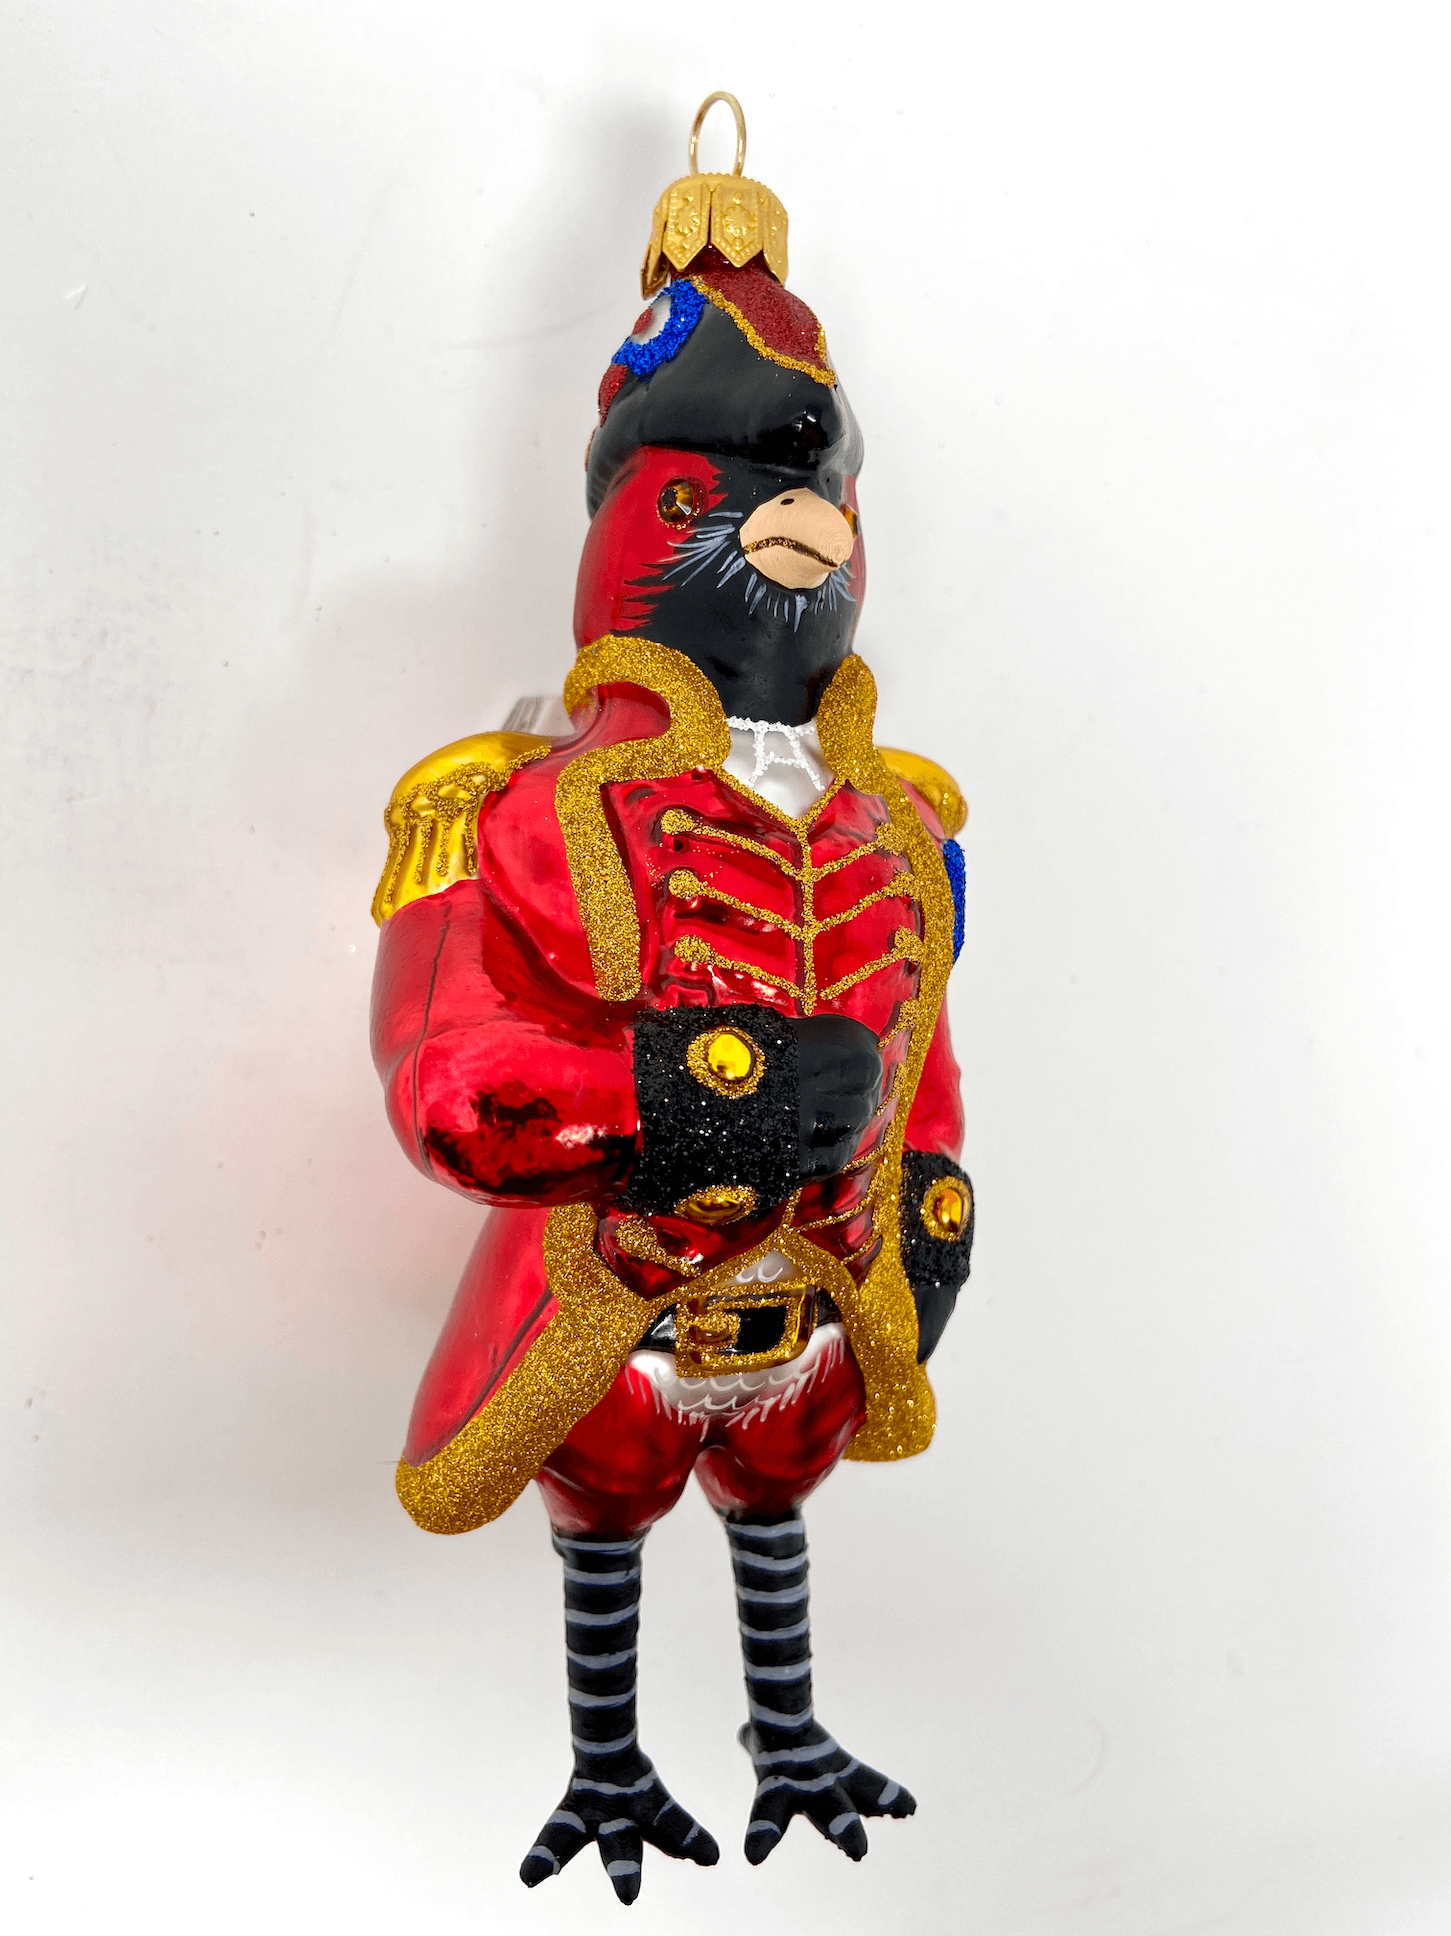 Beautiful red cardinal dressed in a gilded and ornate red English coat and black hat. Polish glass christmas ornaments in saturated colors.